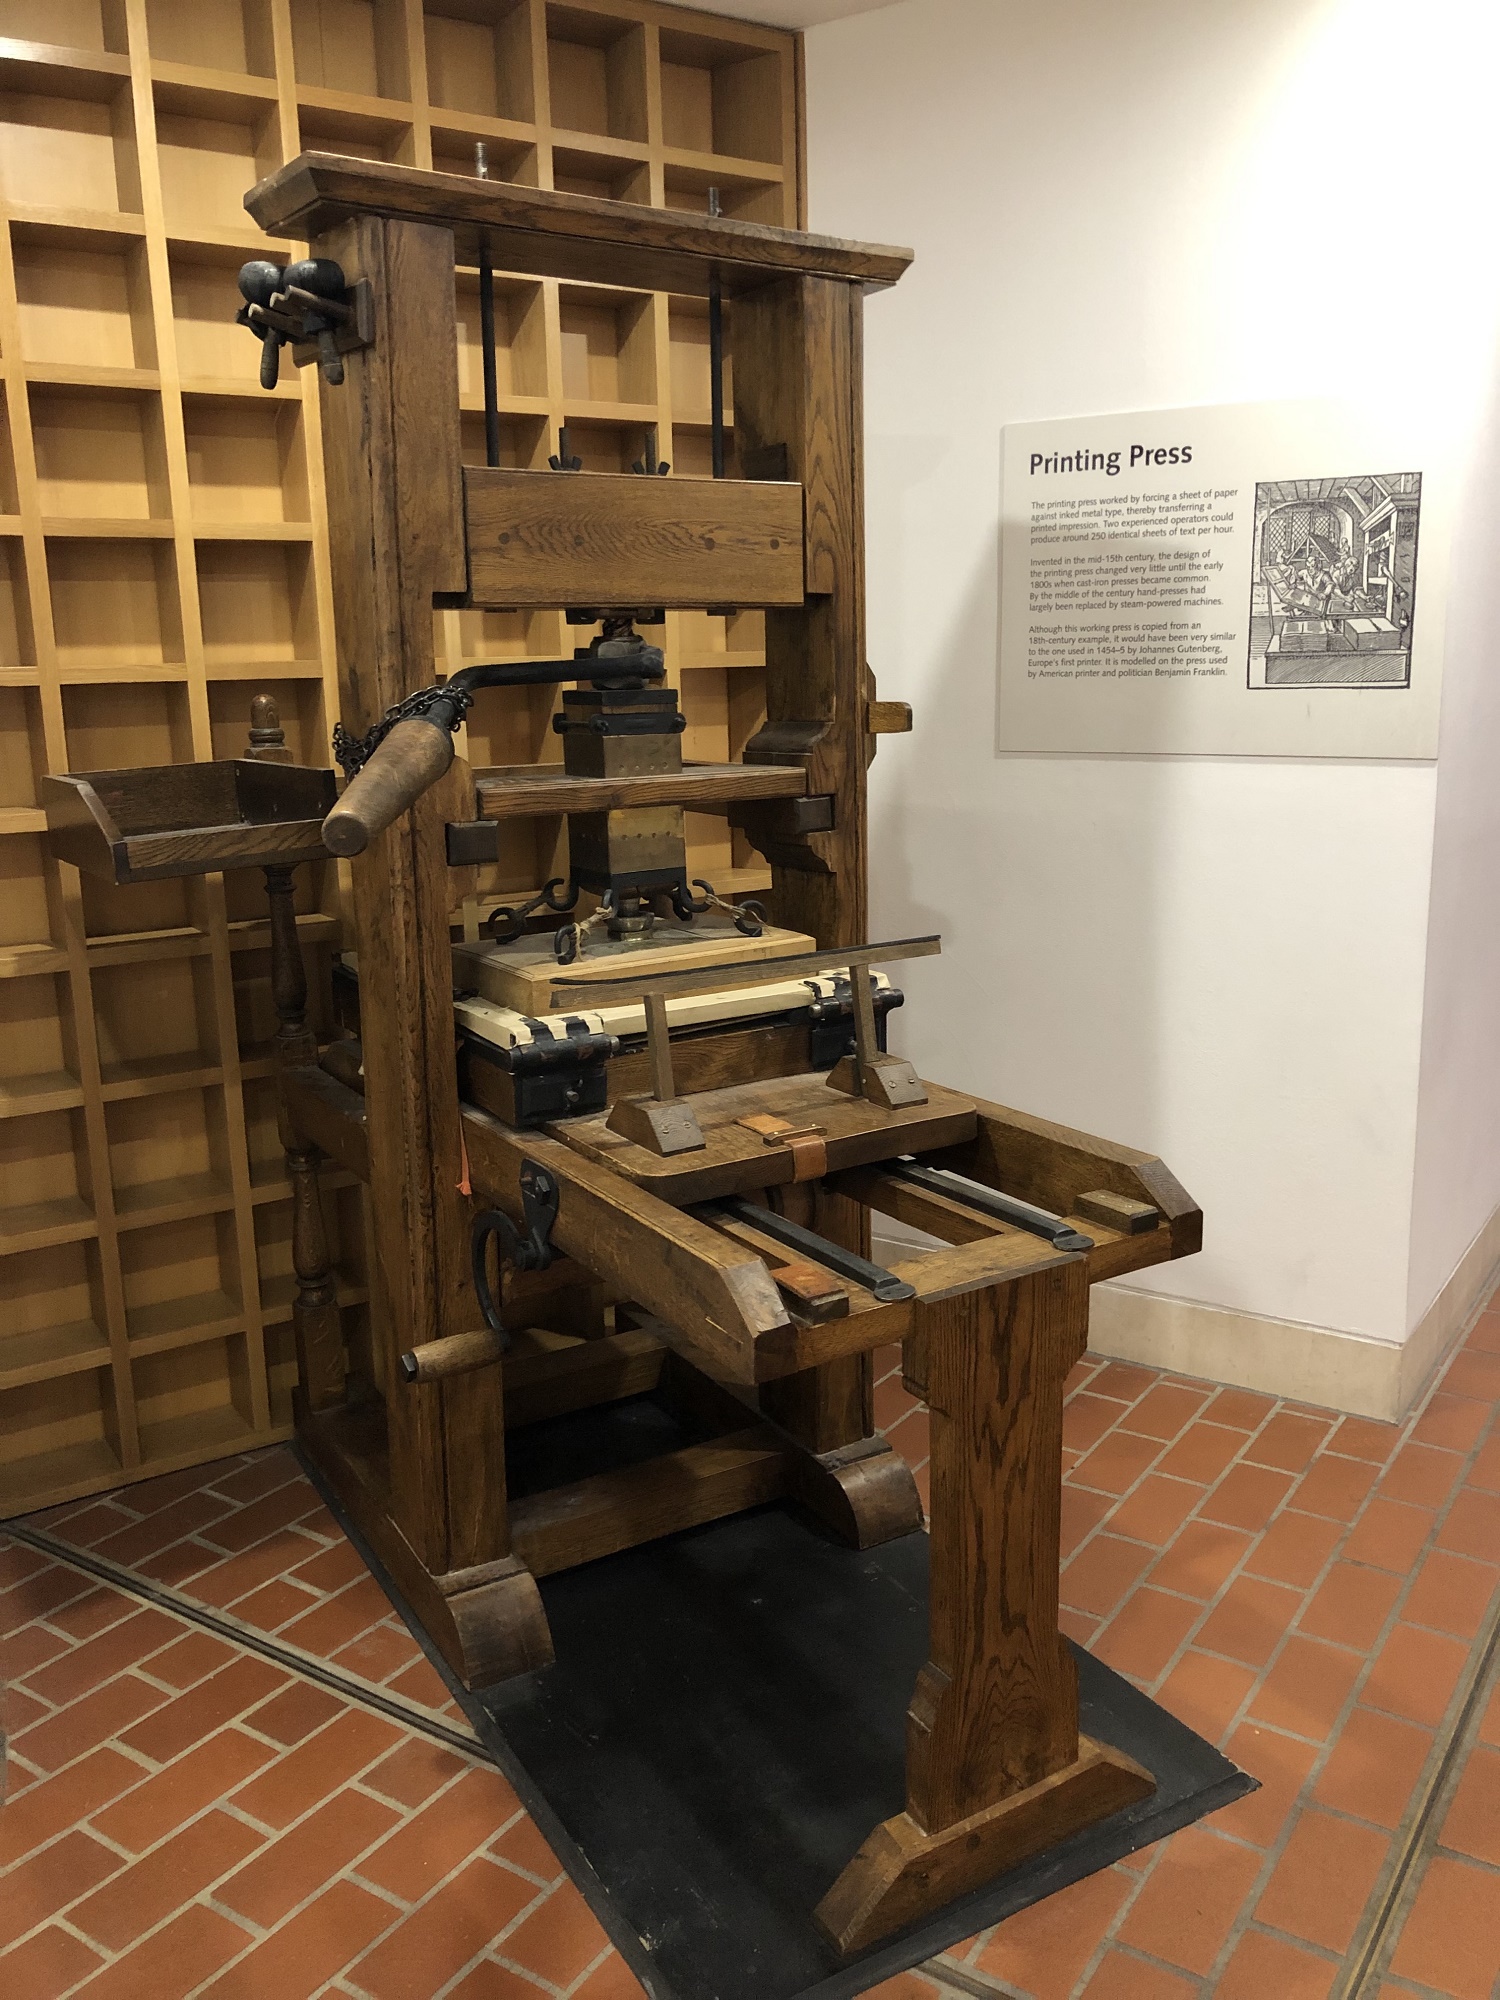 Replica of an 18th century Printing Press, located on the Lower Ground Floor of the British Library, London. Photo taken by the author.